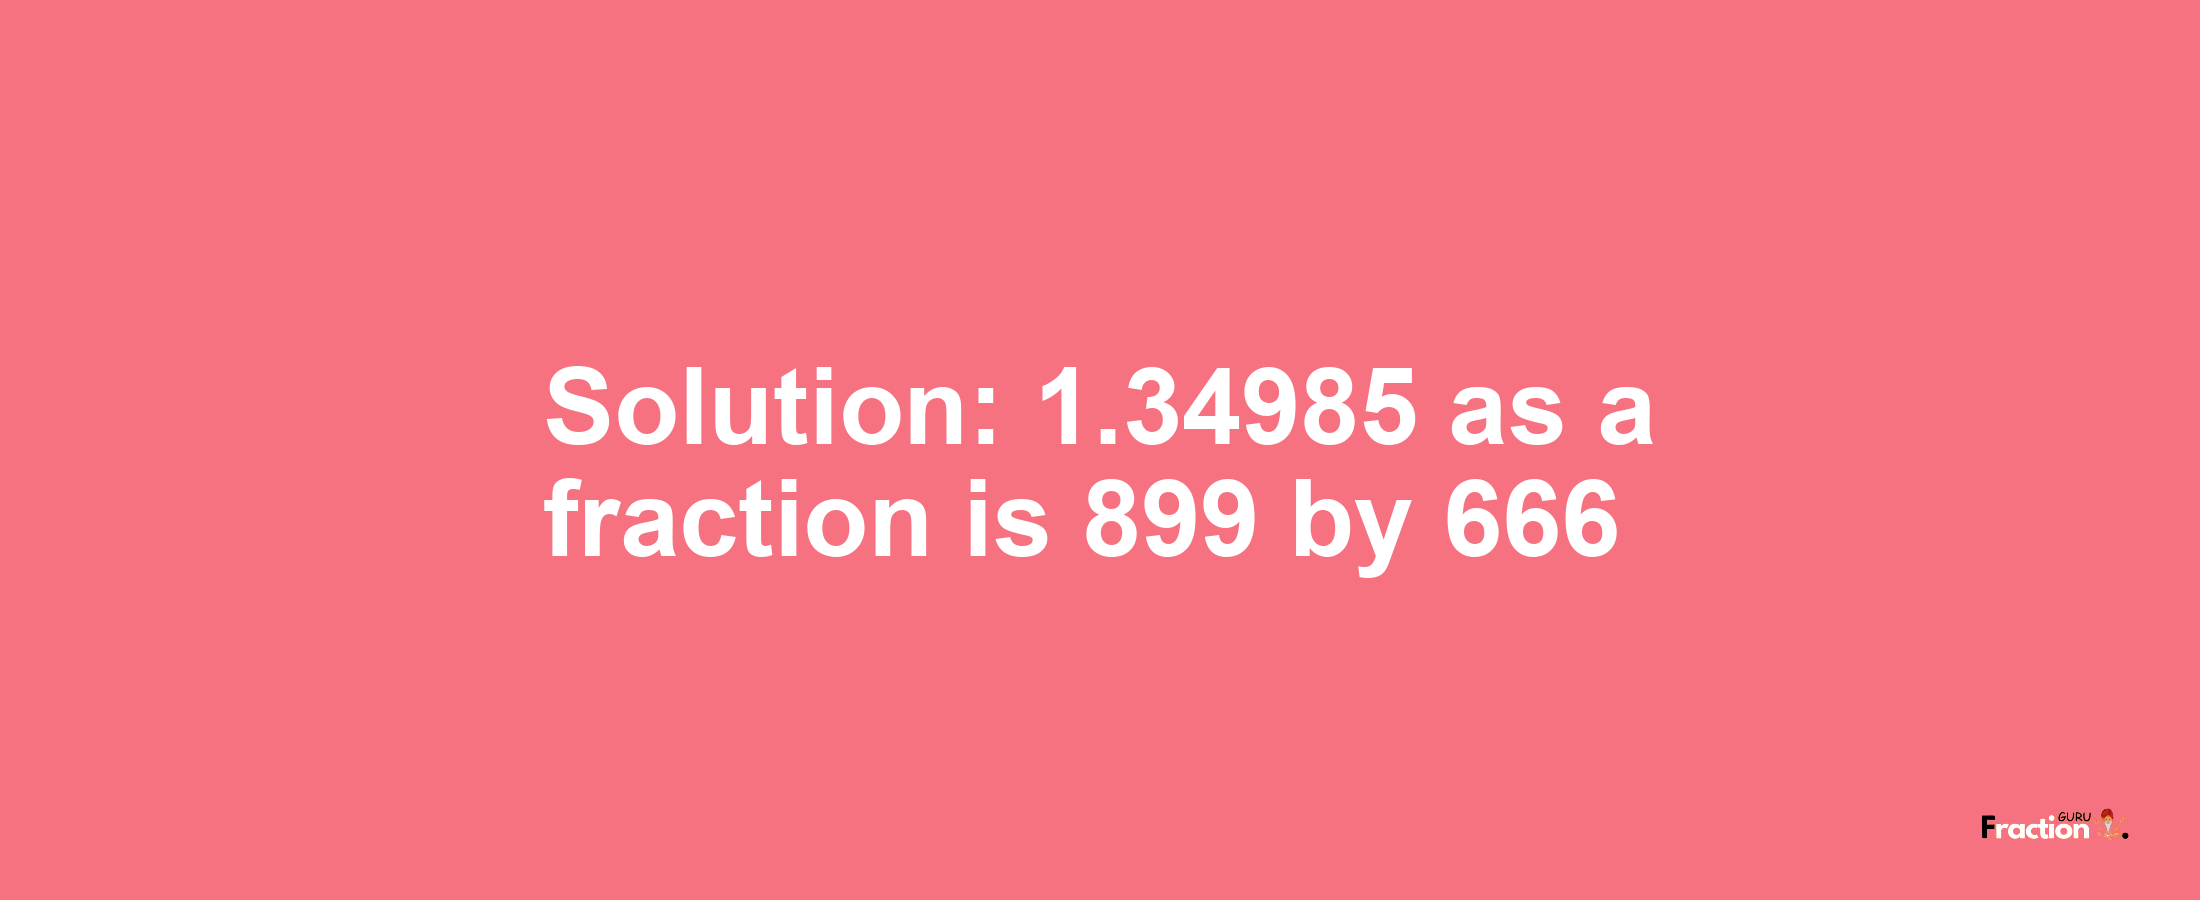 Solution:1.34985 as a fraction is 899/666